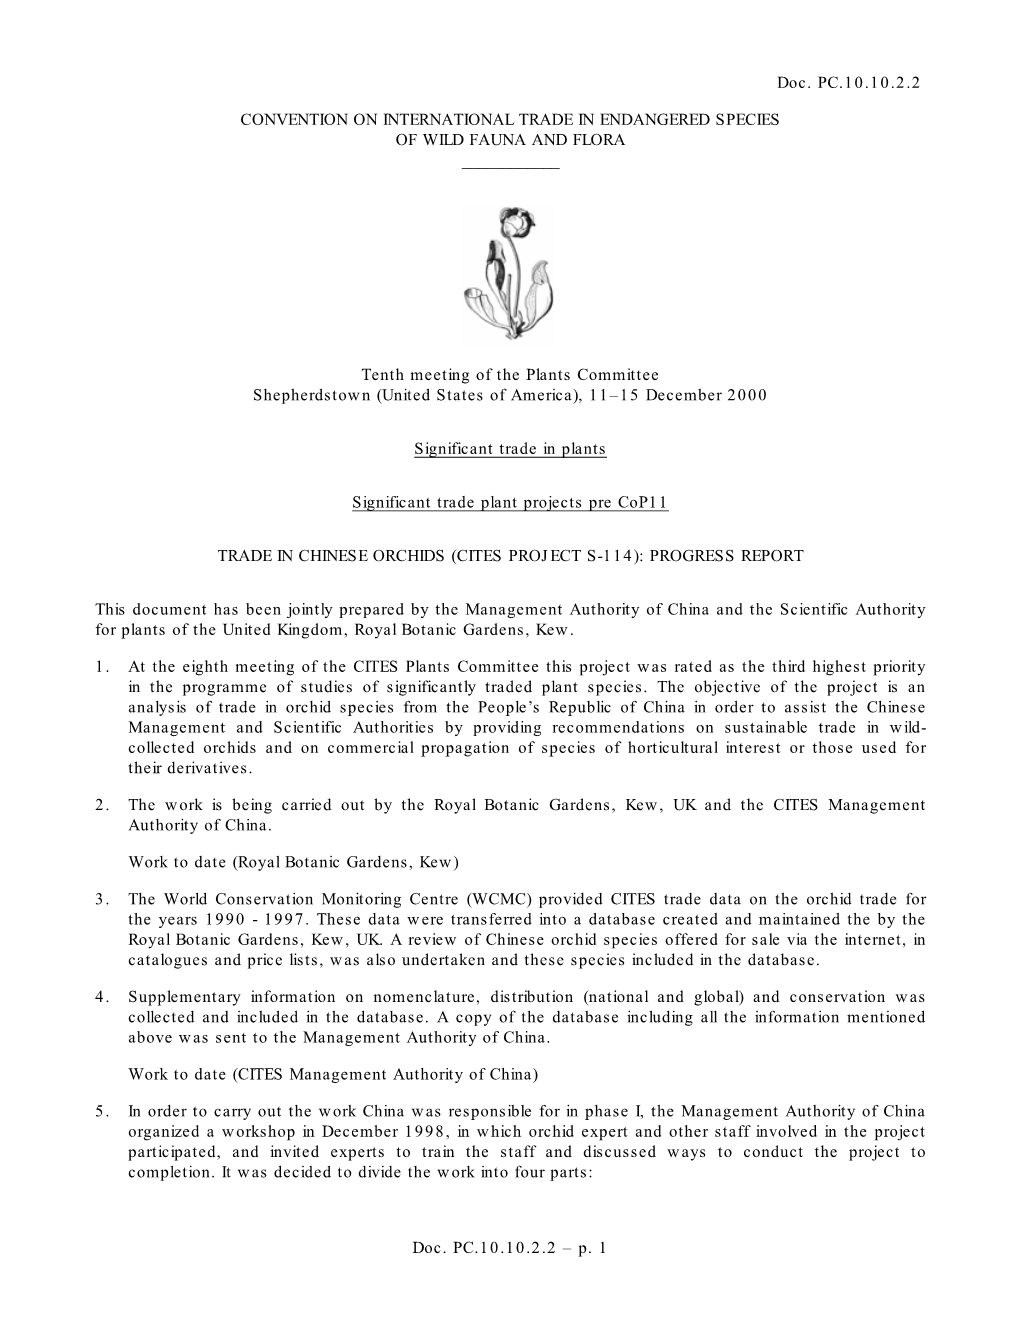 Doc. PC.10.10.2.2 – P. 1 Doc. PC.10.10.2.2 CONVENTION on INTERNATIONAL TRADE in ENDANGERED SPECIES of WILD FAUNA and FLORA